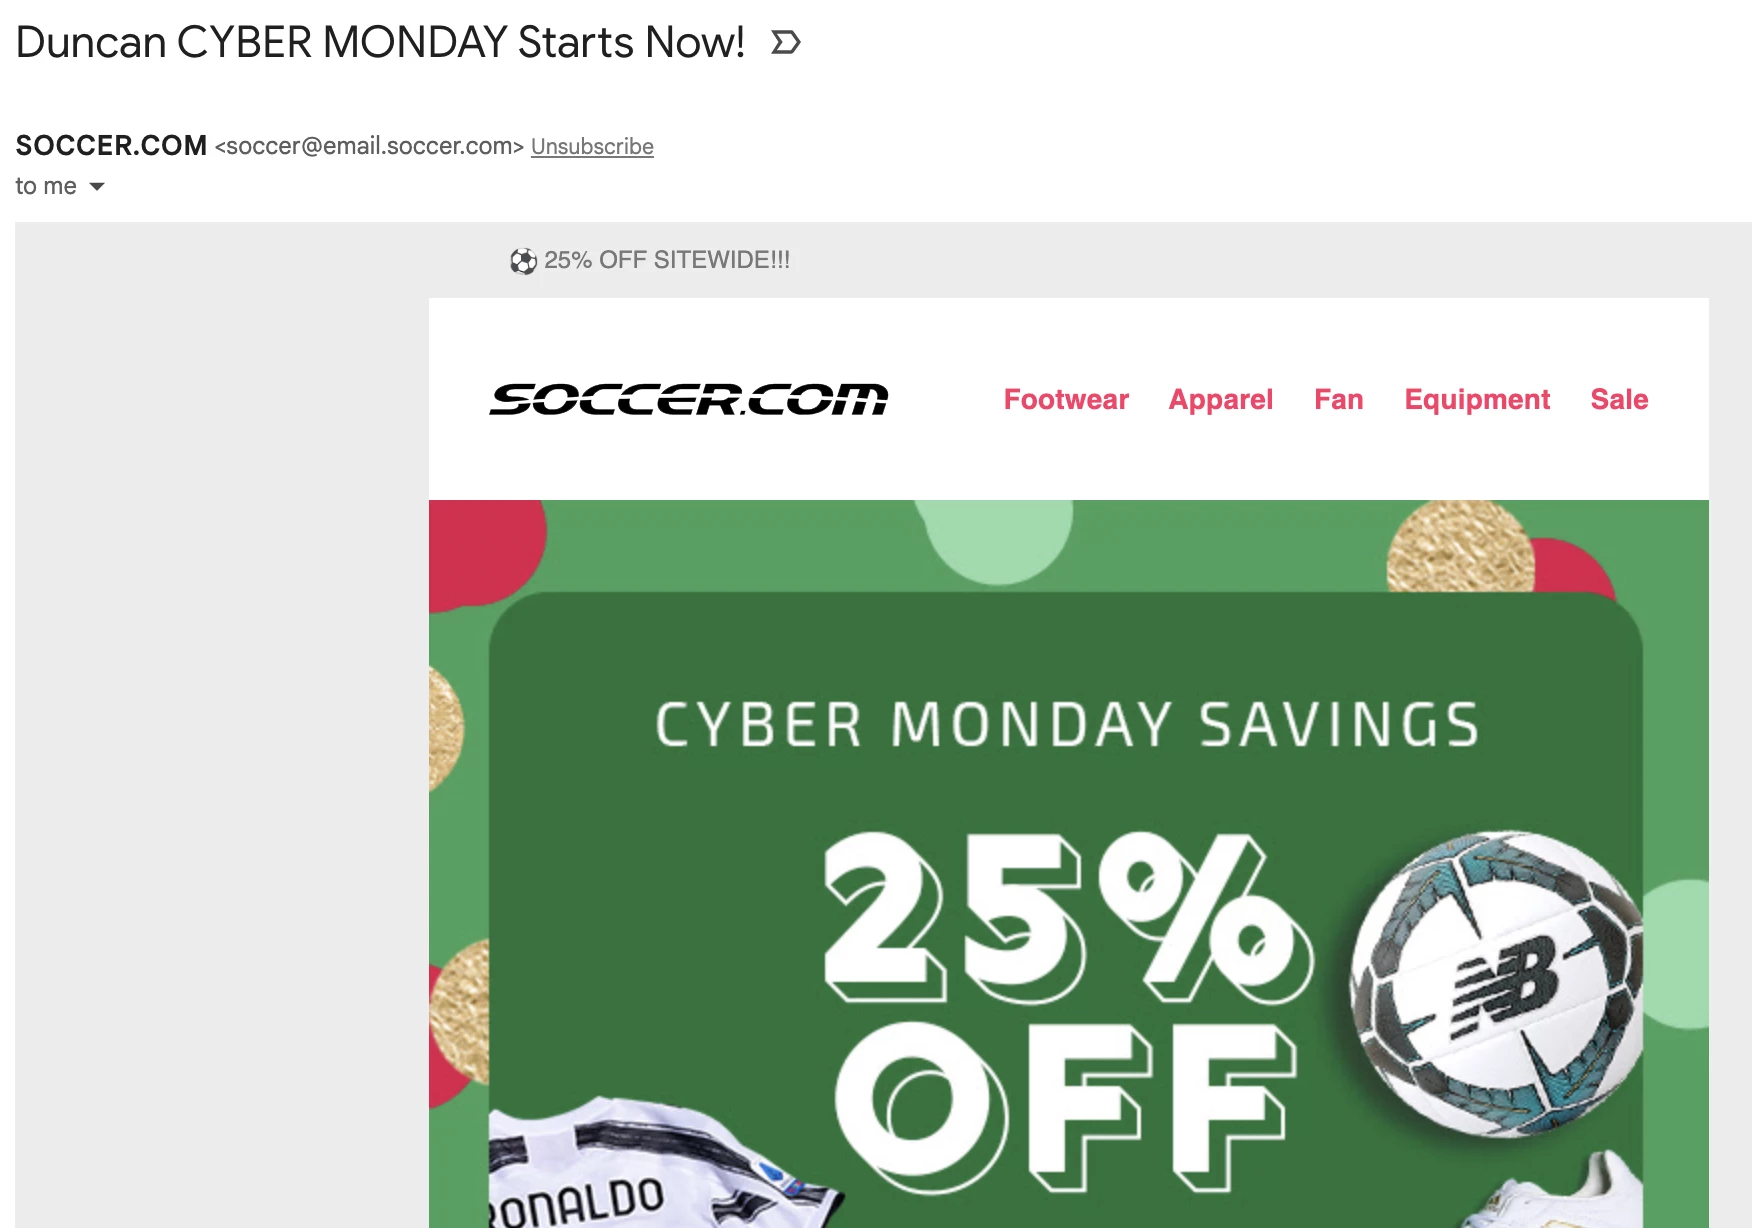 Soccer.com Cyber Monday email